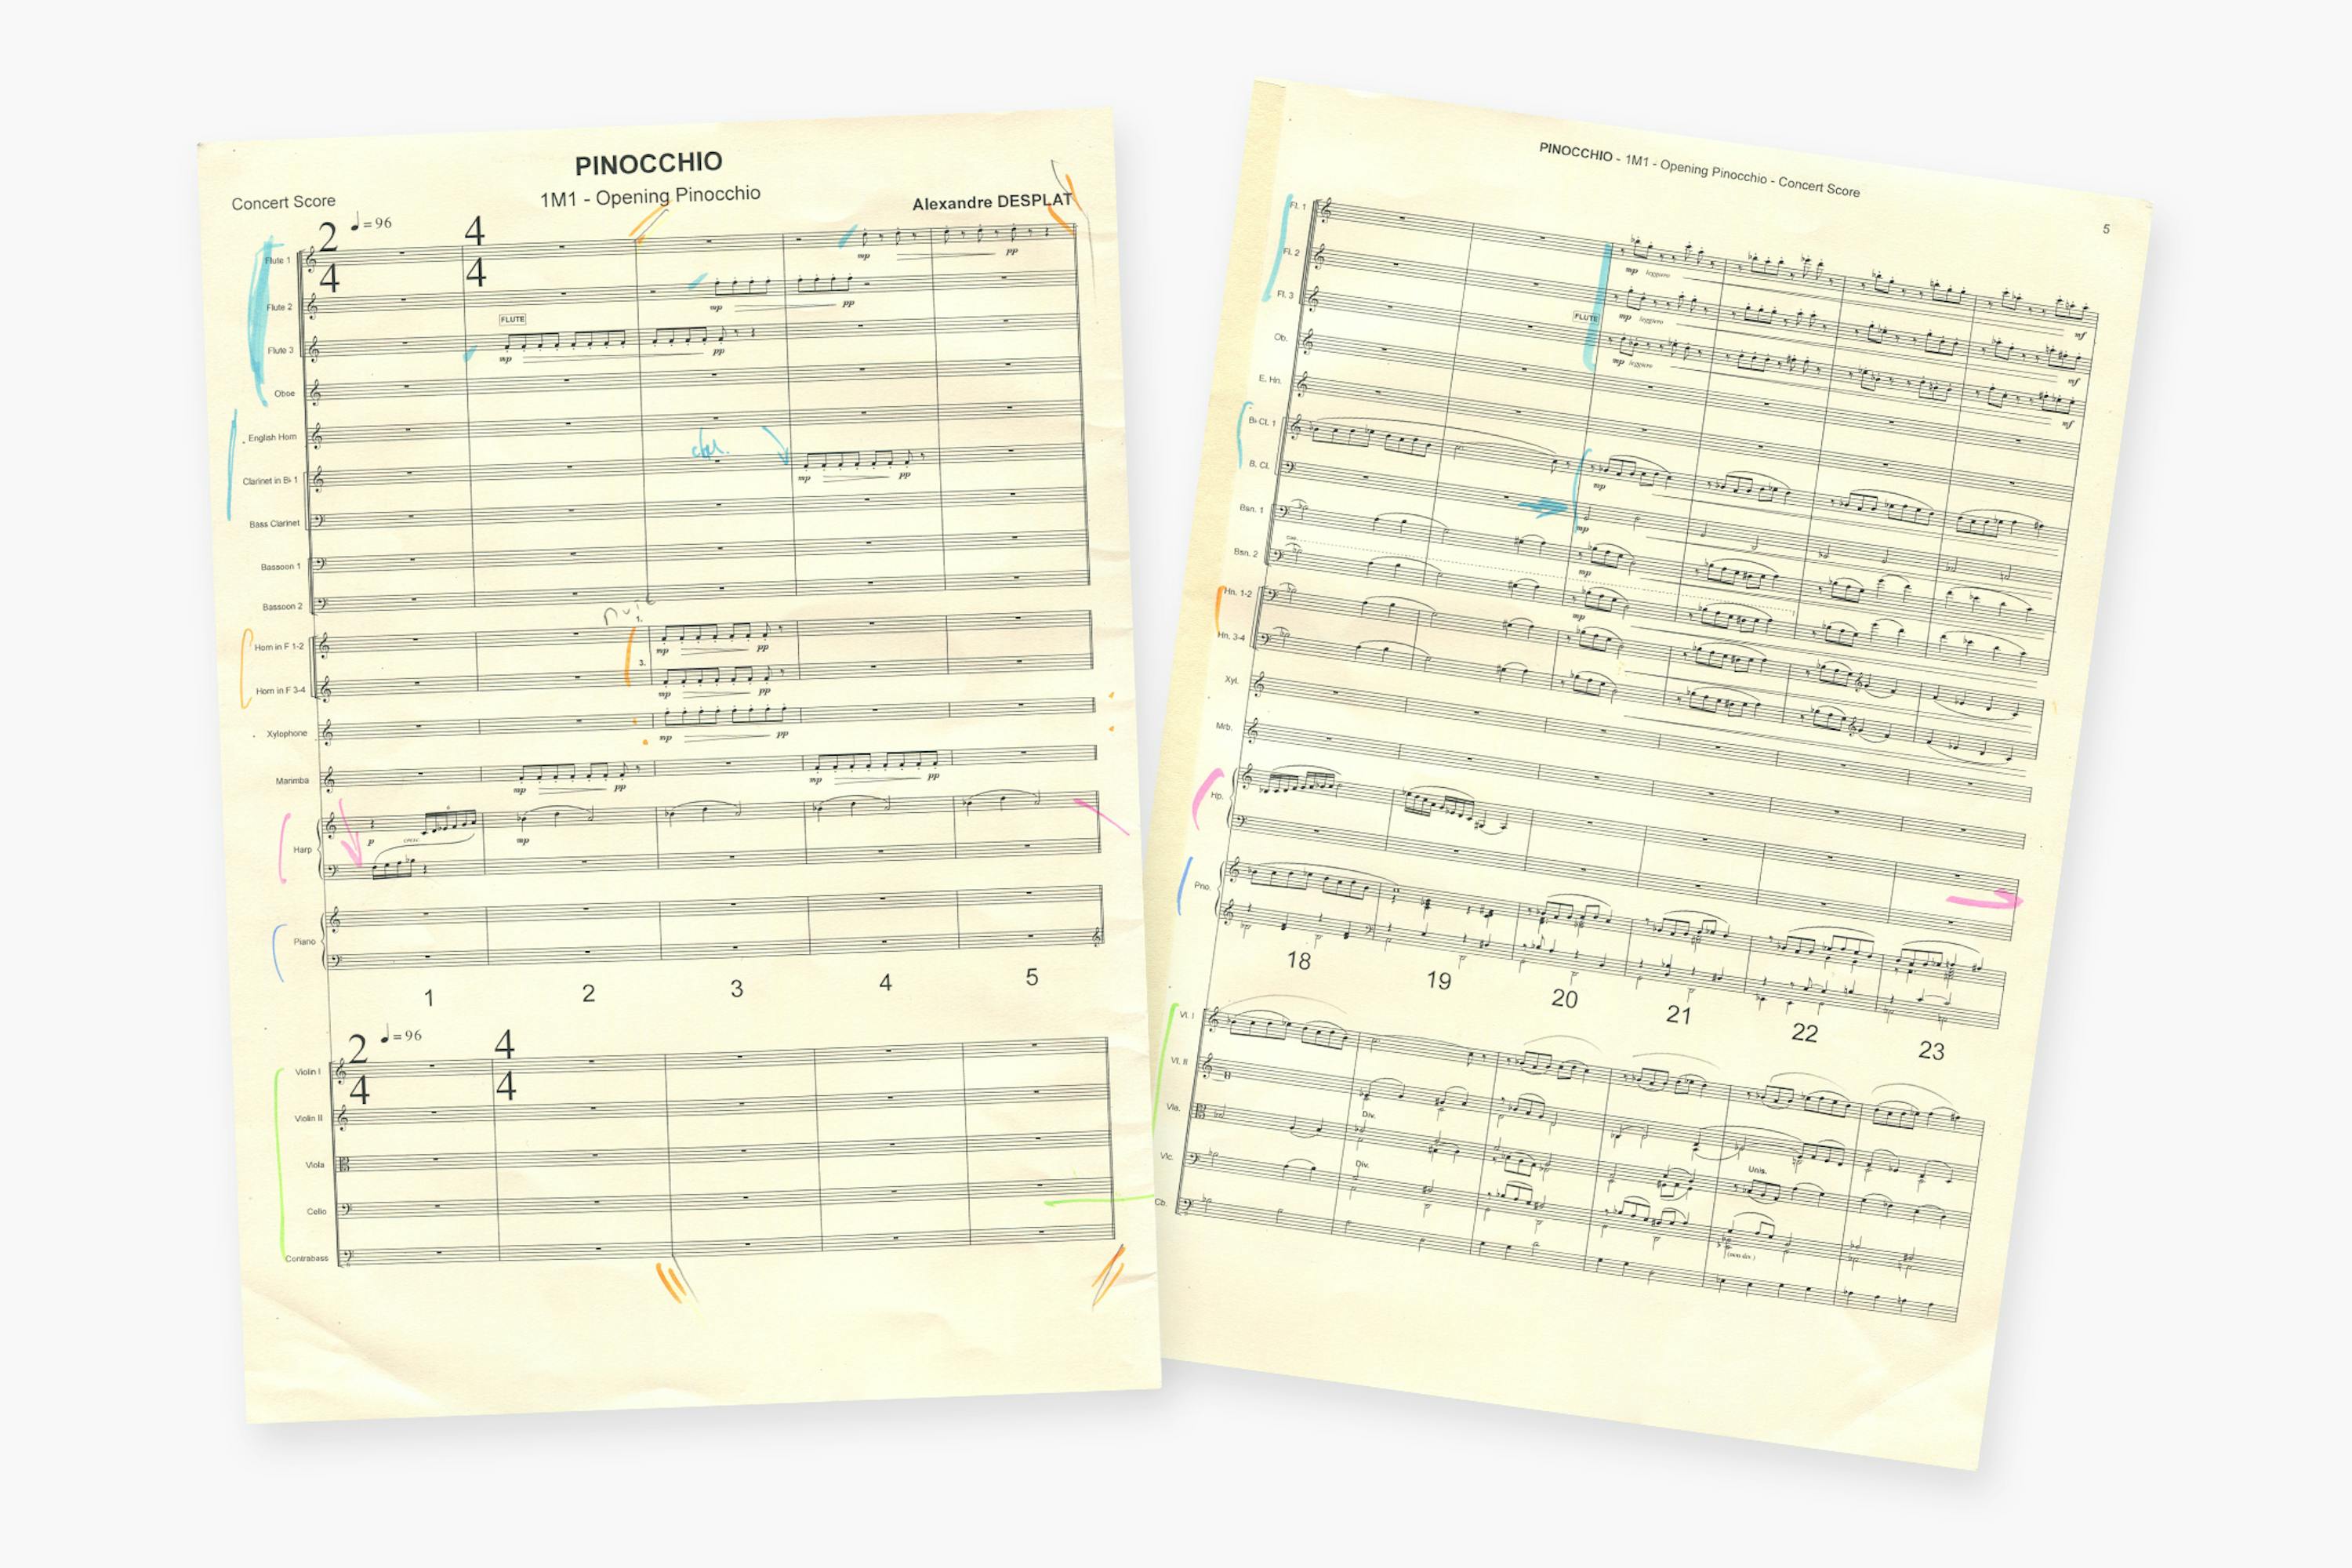 An annotated music sheet from Guillermo del Toro's Pinocchio.